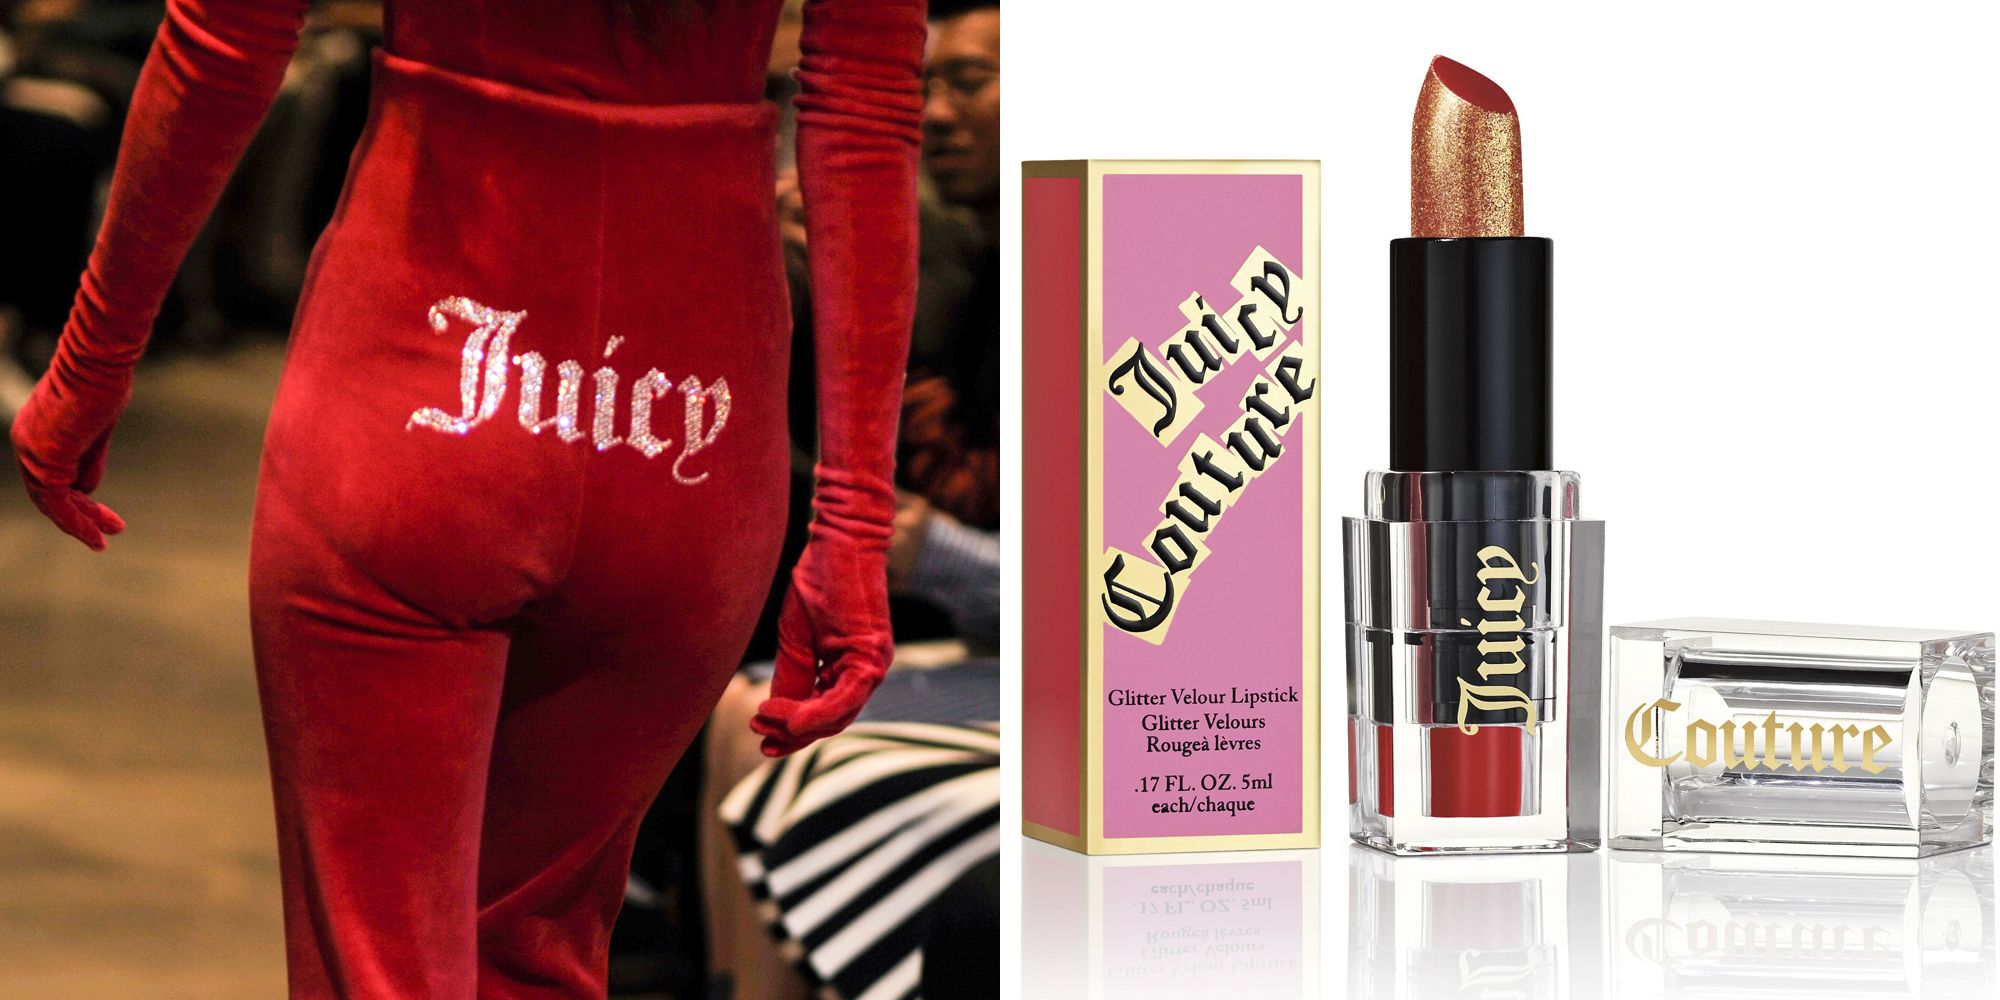 Juicy Couture is Launching a Makeup Line - Juicy Couture New